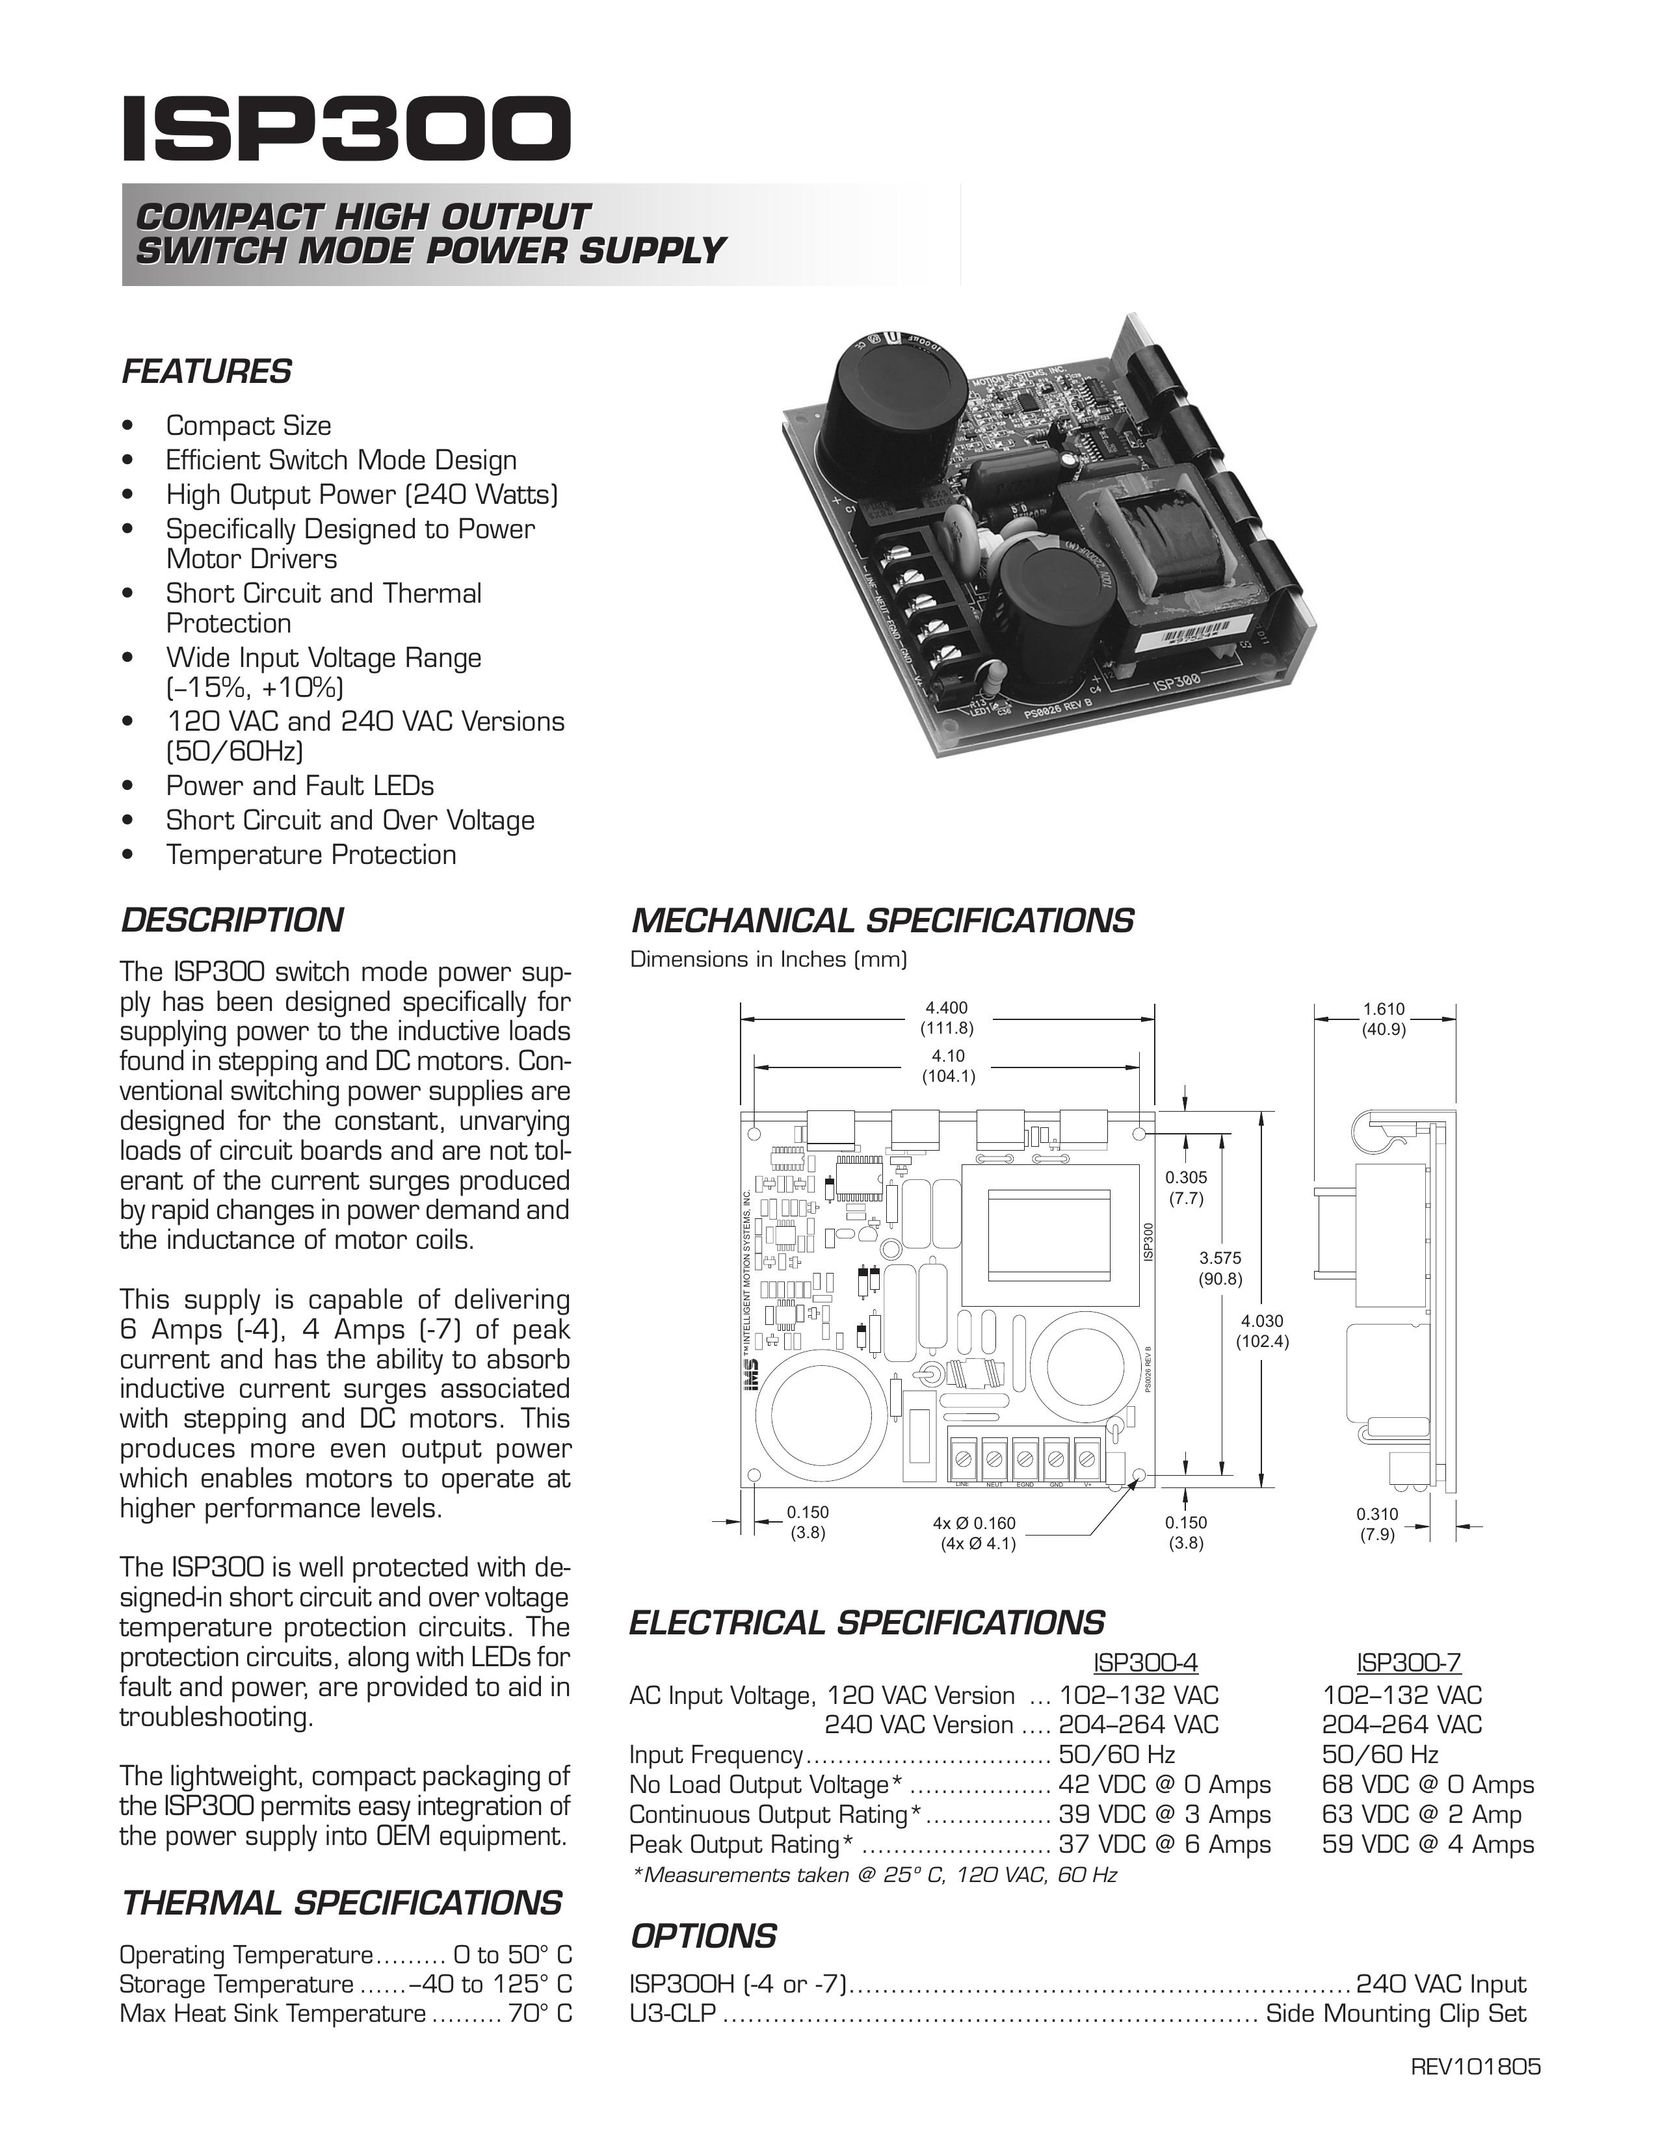 Intelligent Motion Systems ISP300 Power Supply User Manual